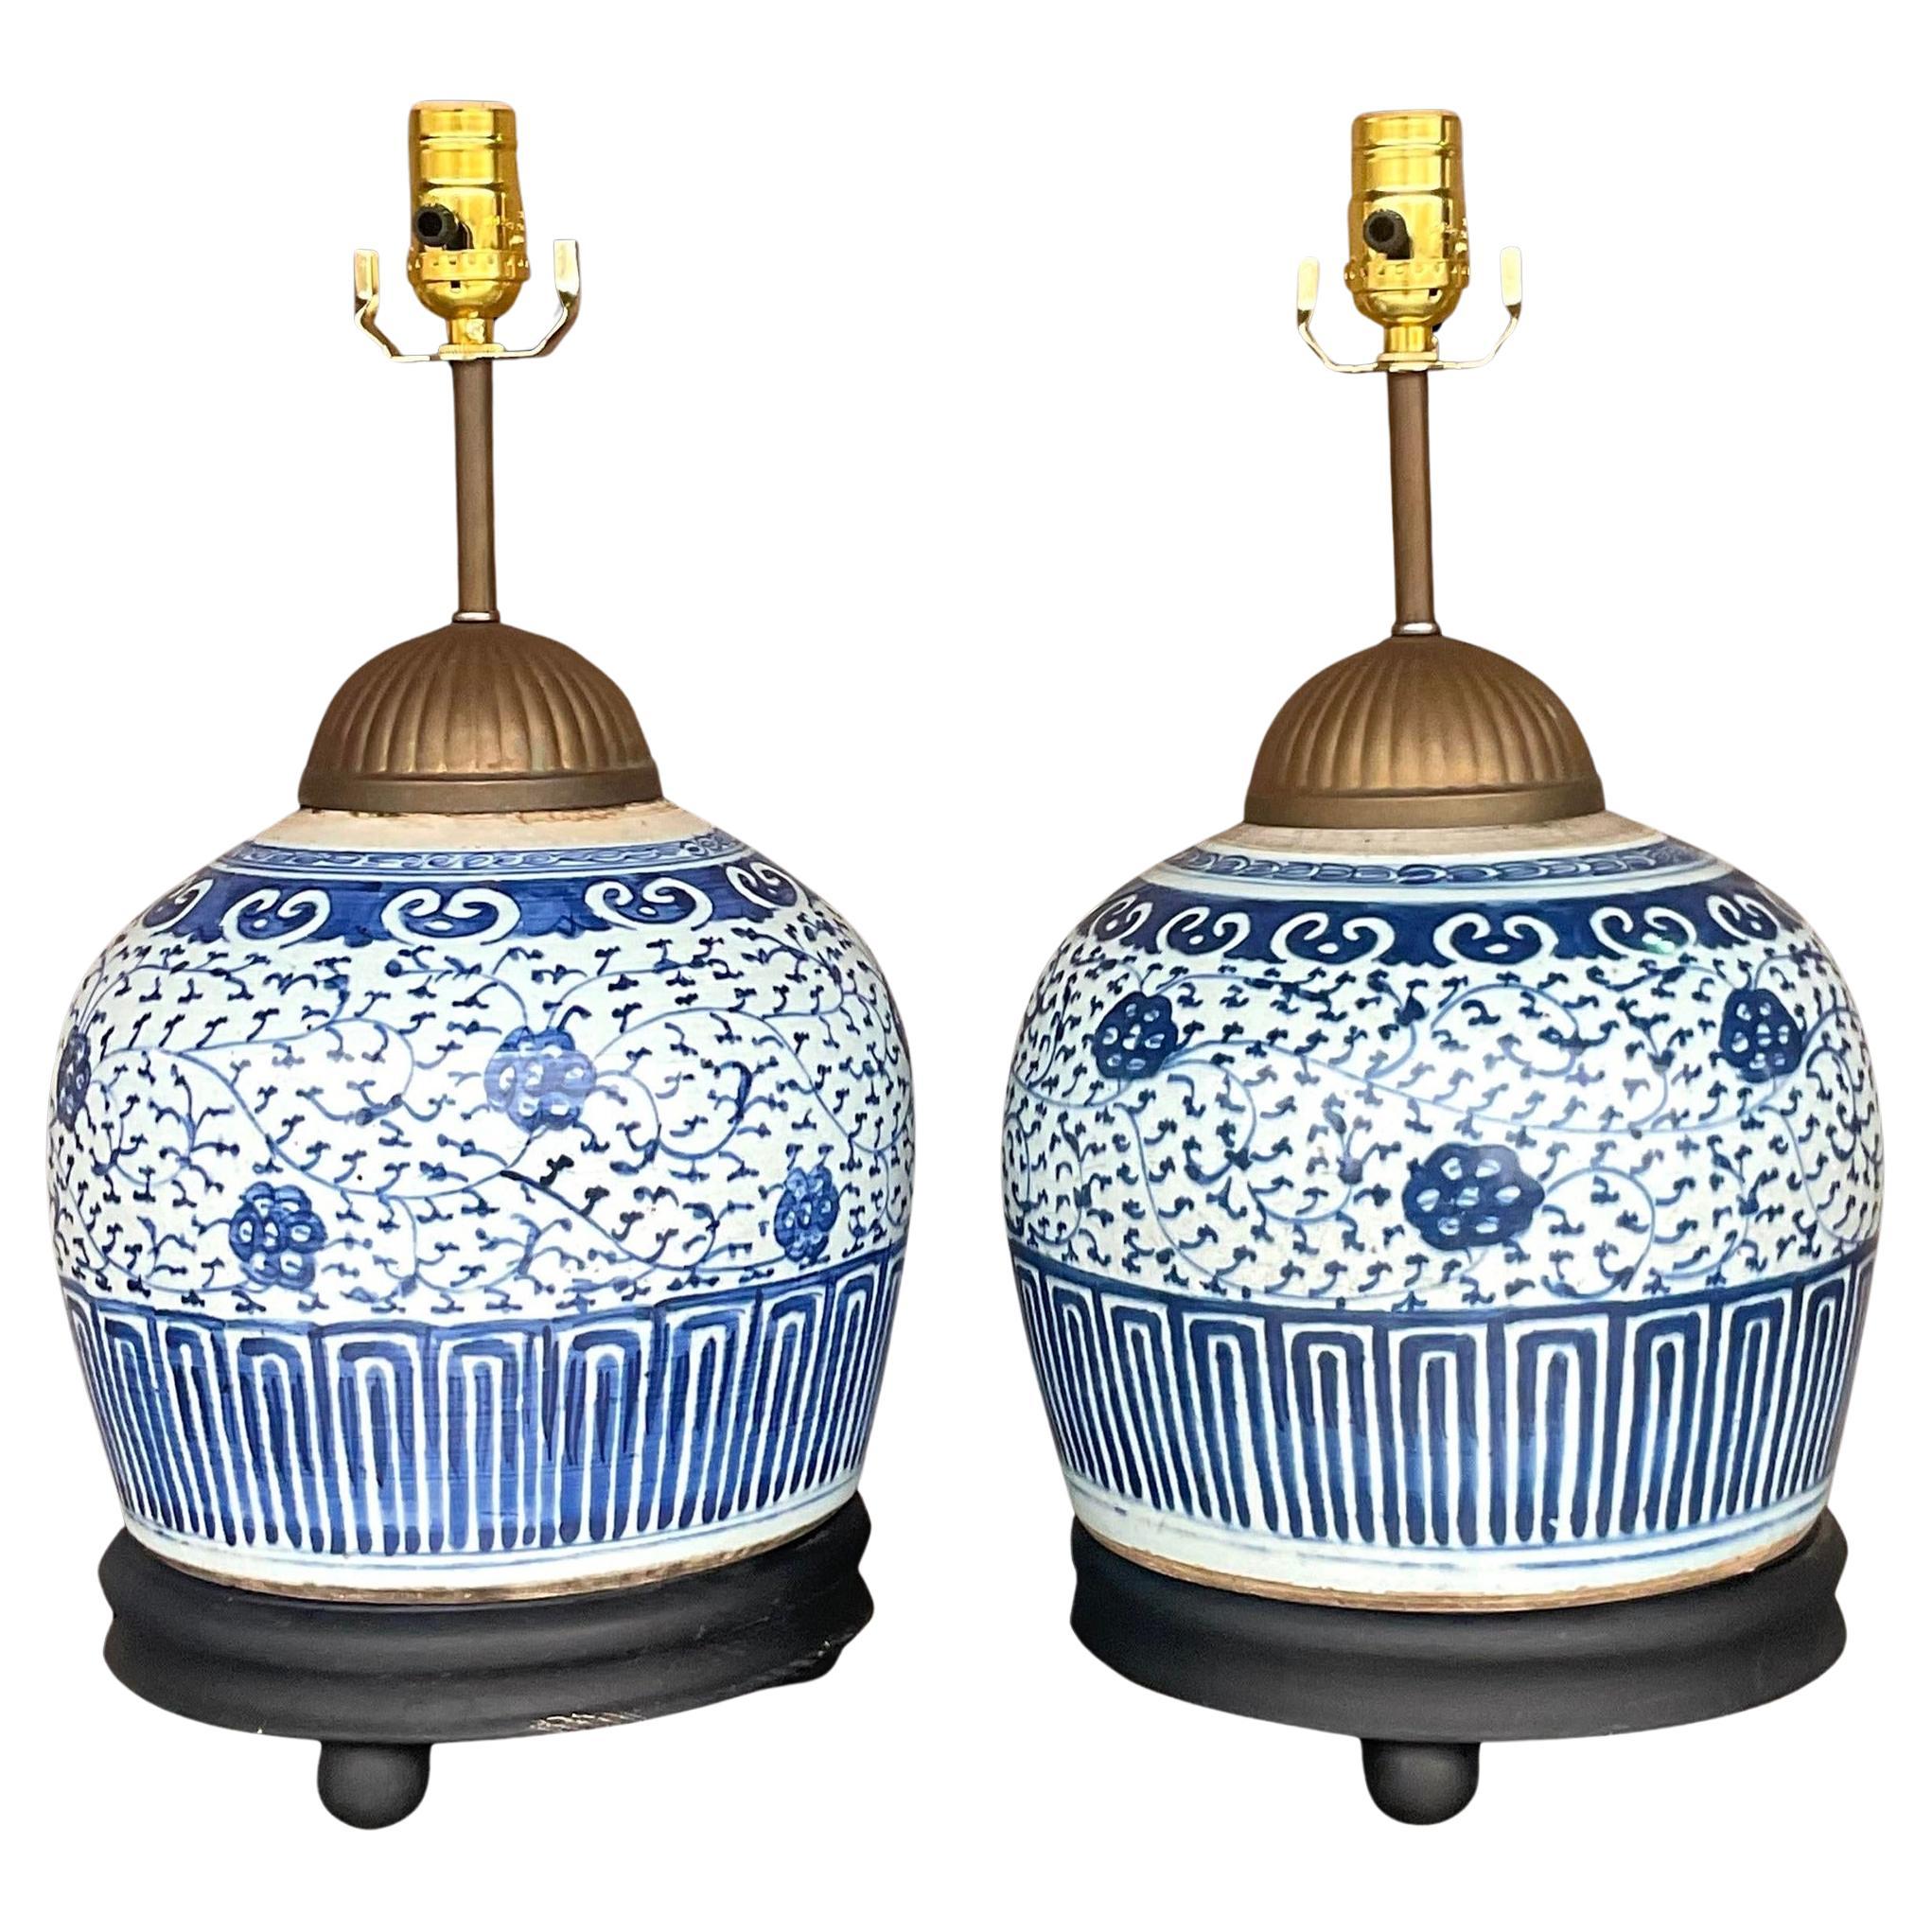 Vintage Asian Blue and White Ceramic Lamps - a Pair